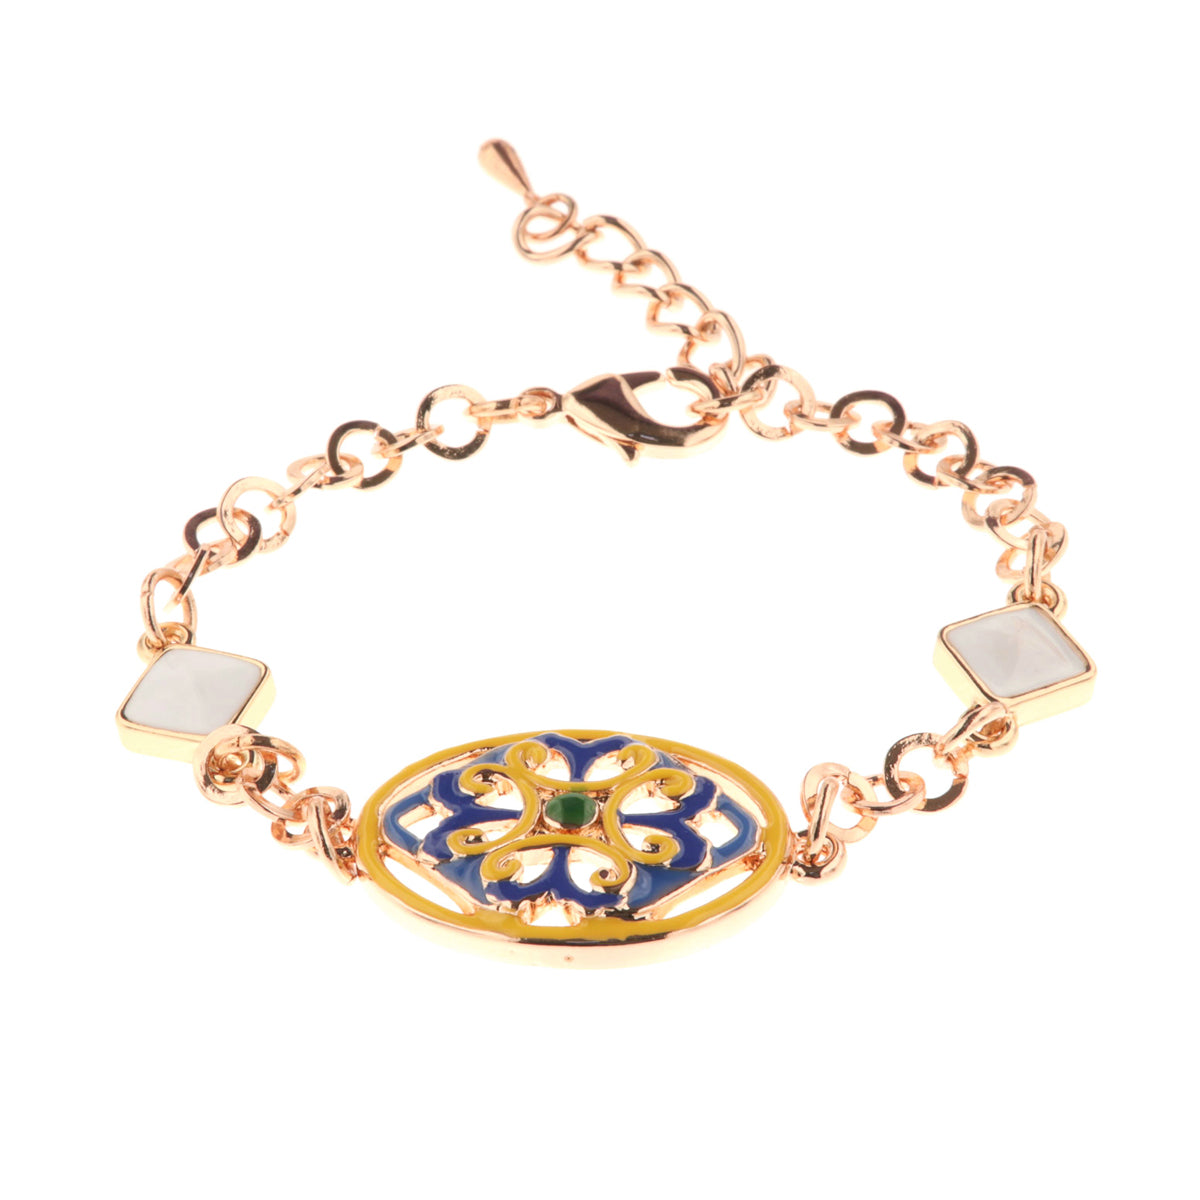 Metal bracelet white crystals with central detail in ever -glazed blue and yellow flower